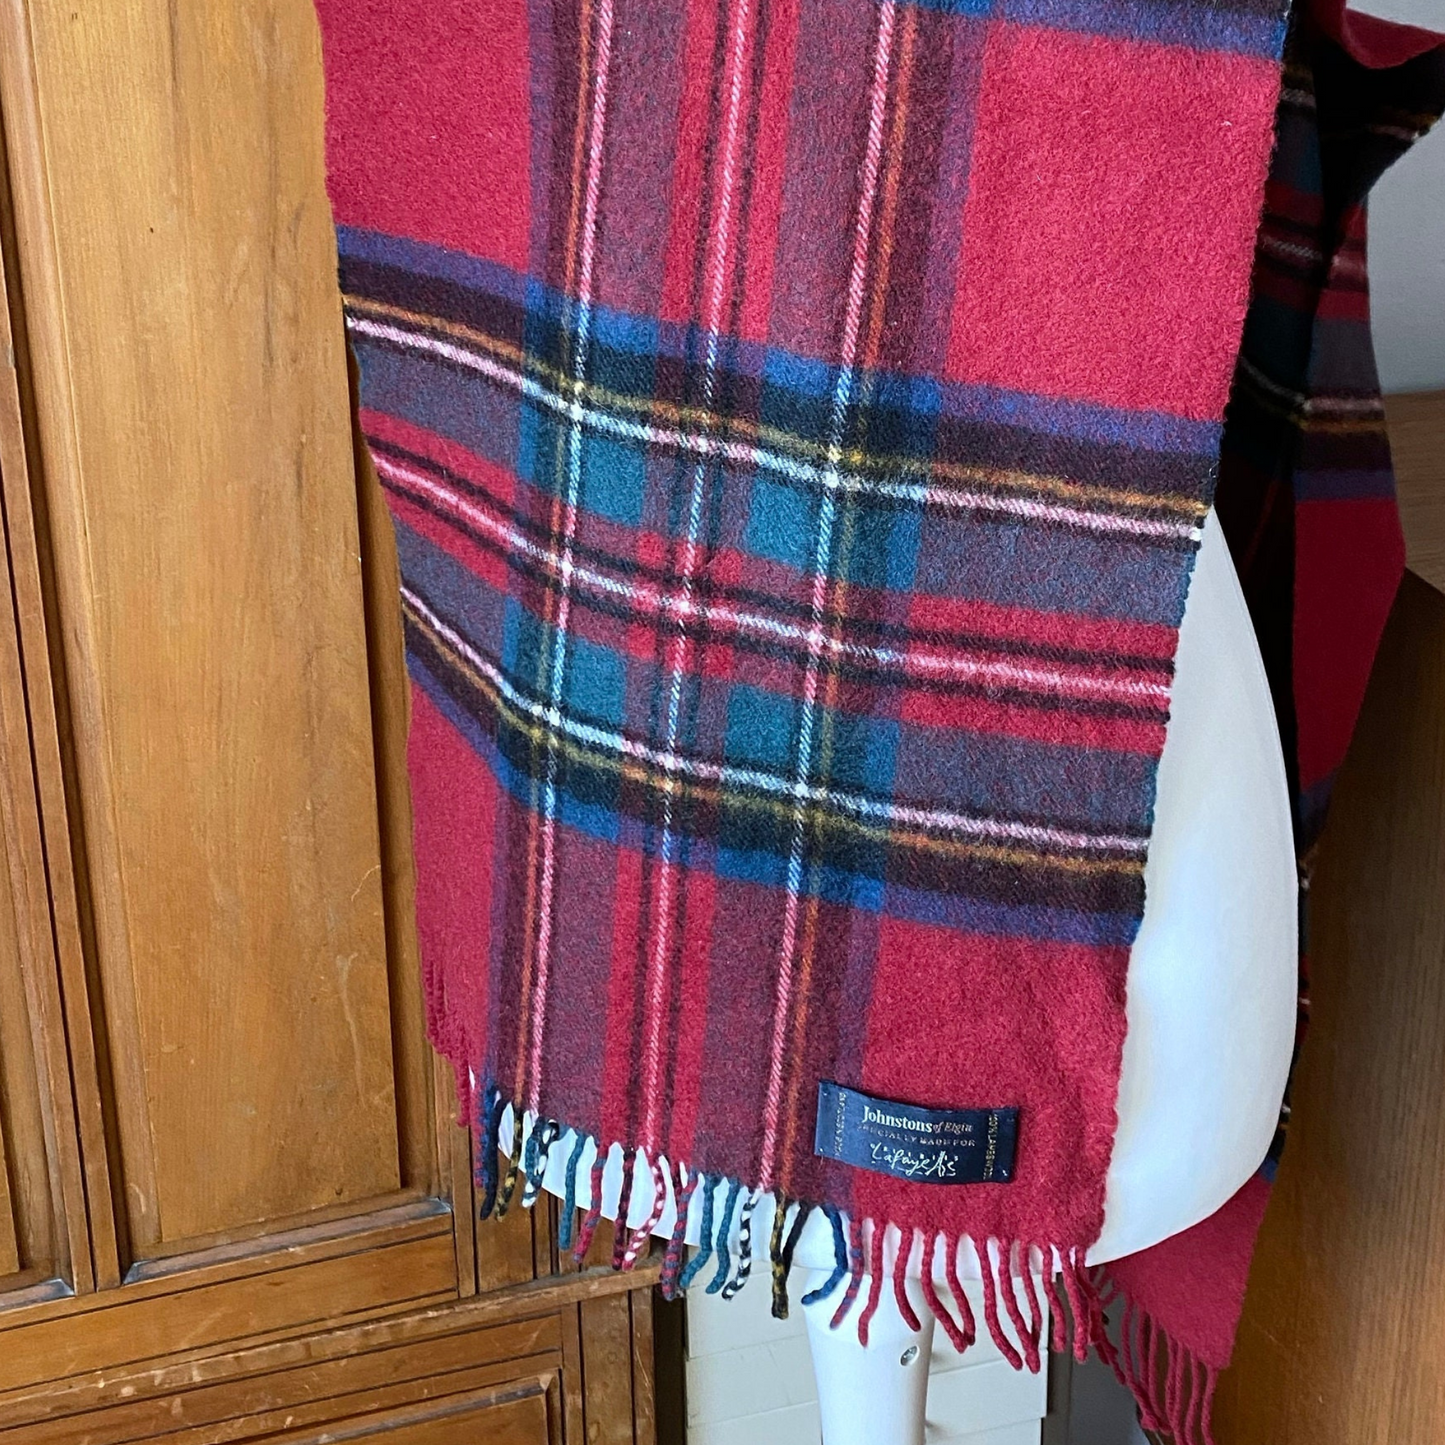 Vintage tartan scarf by Johnstone of Elgin - Timeless fashion statement for any outfit